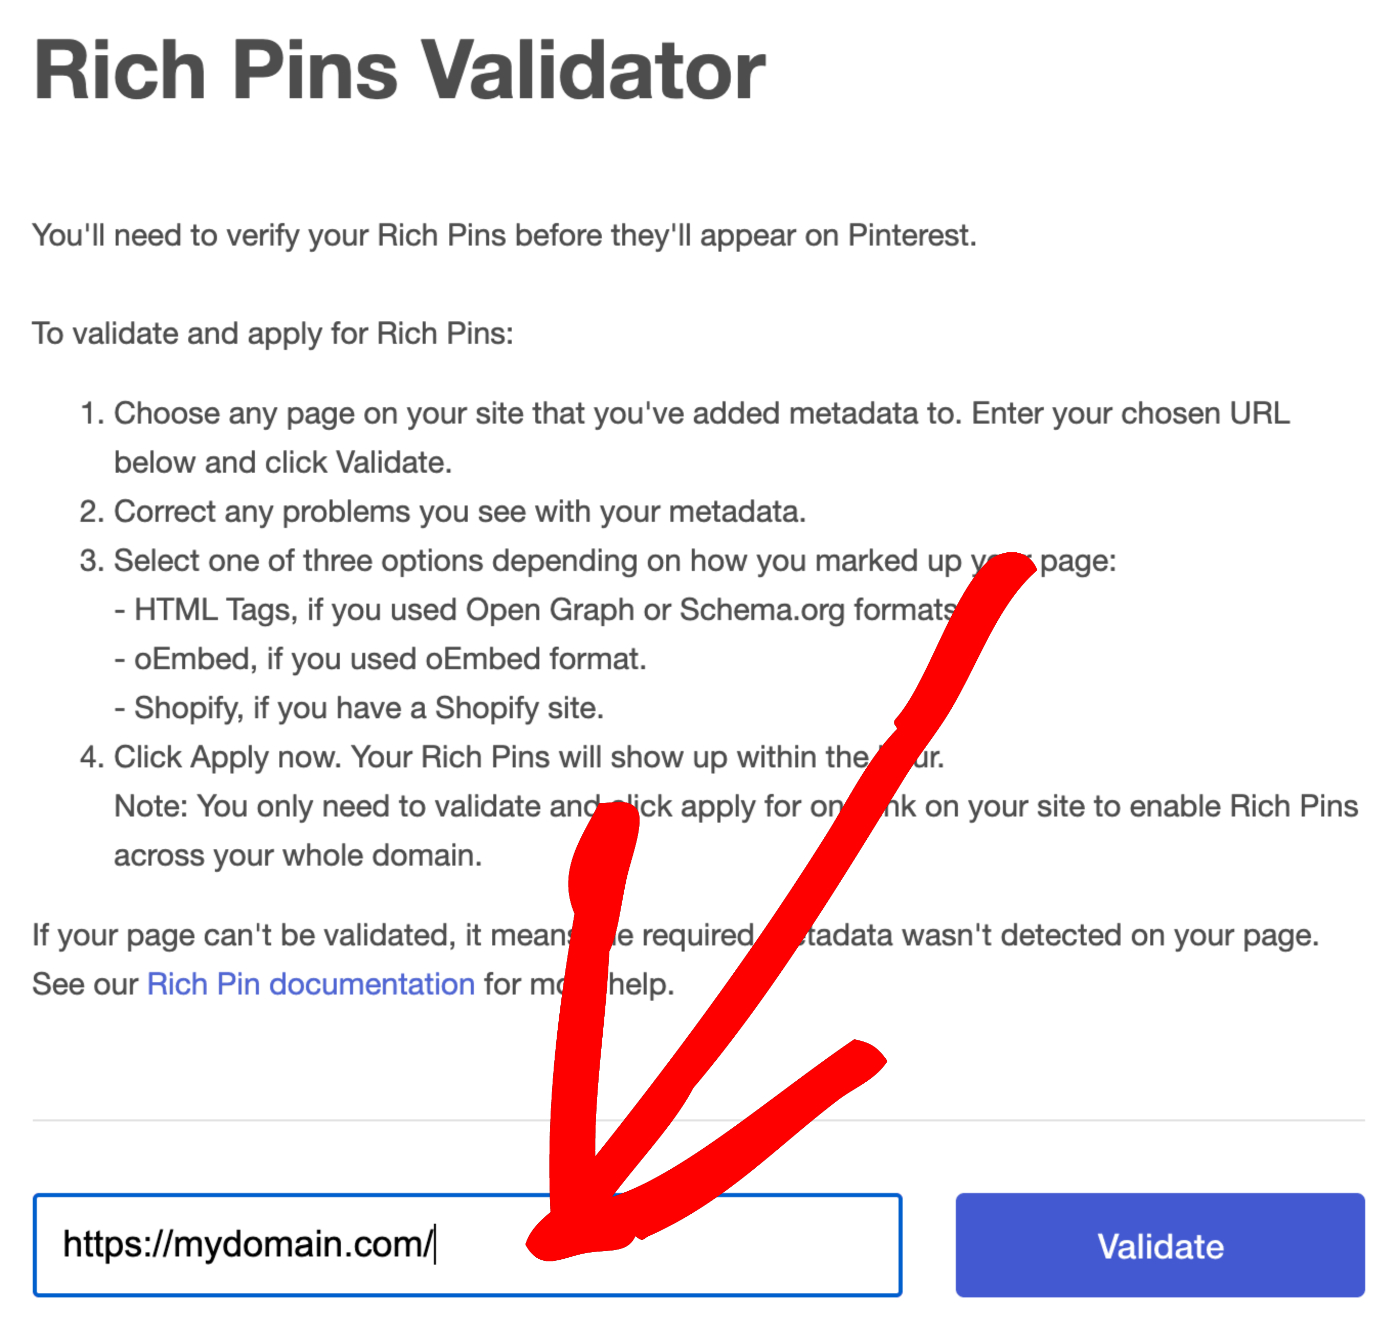 Enter the URL for your homepage in the Pinterest Rich Pins Validator